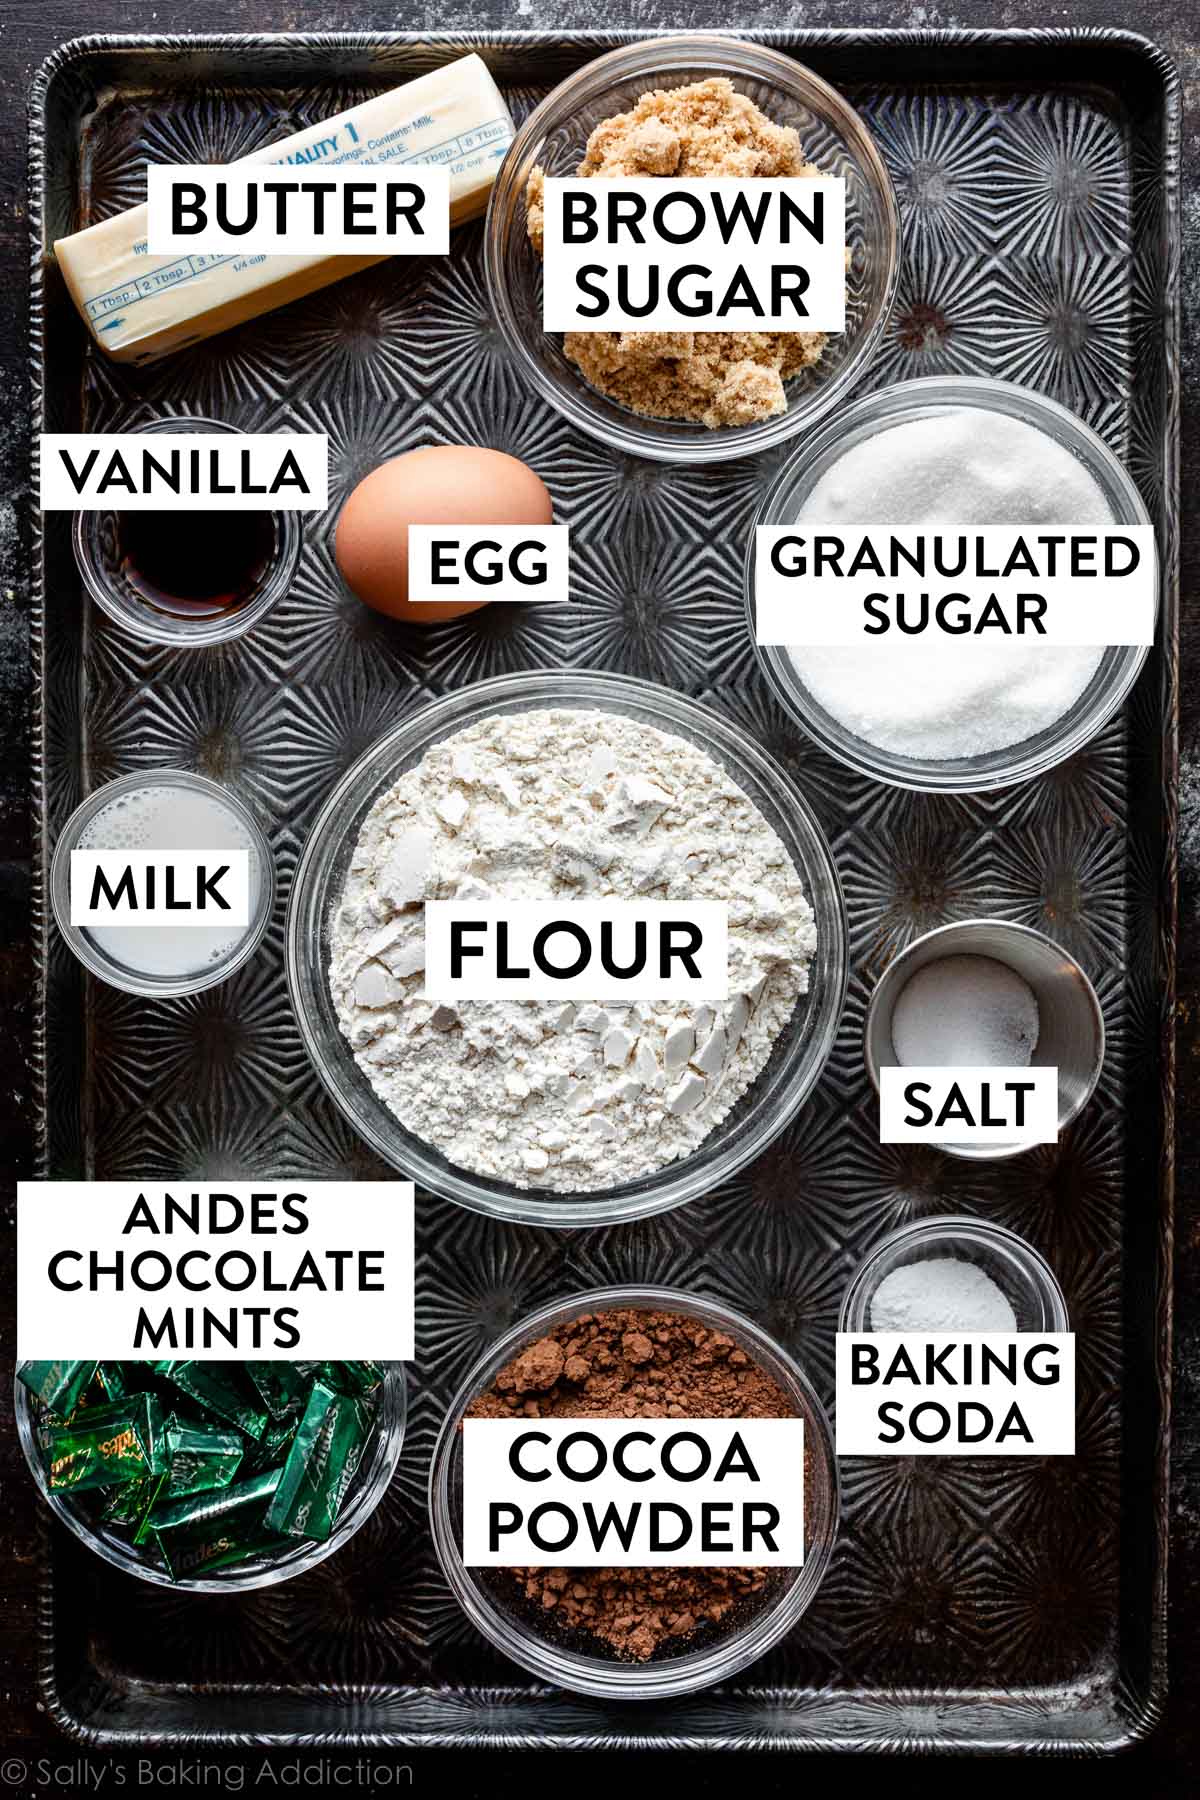 ingredients on baking tray including flour, cocoa powder, butter, egg, brown sugar, bowl of Andes mints, and more.